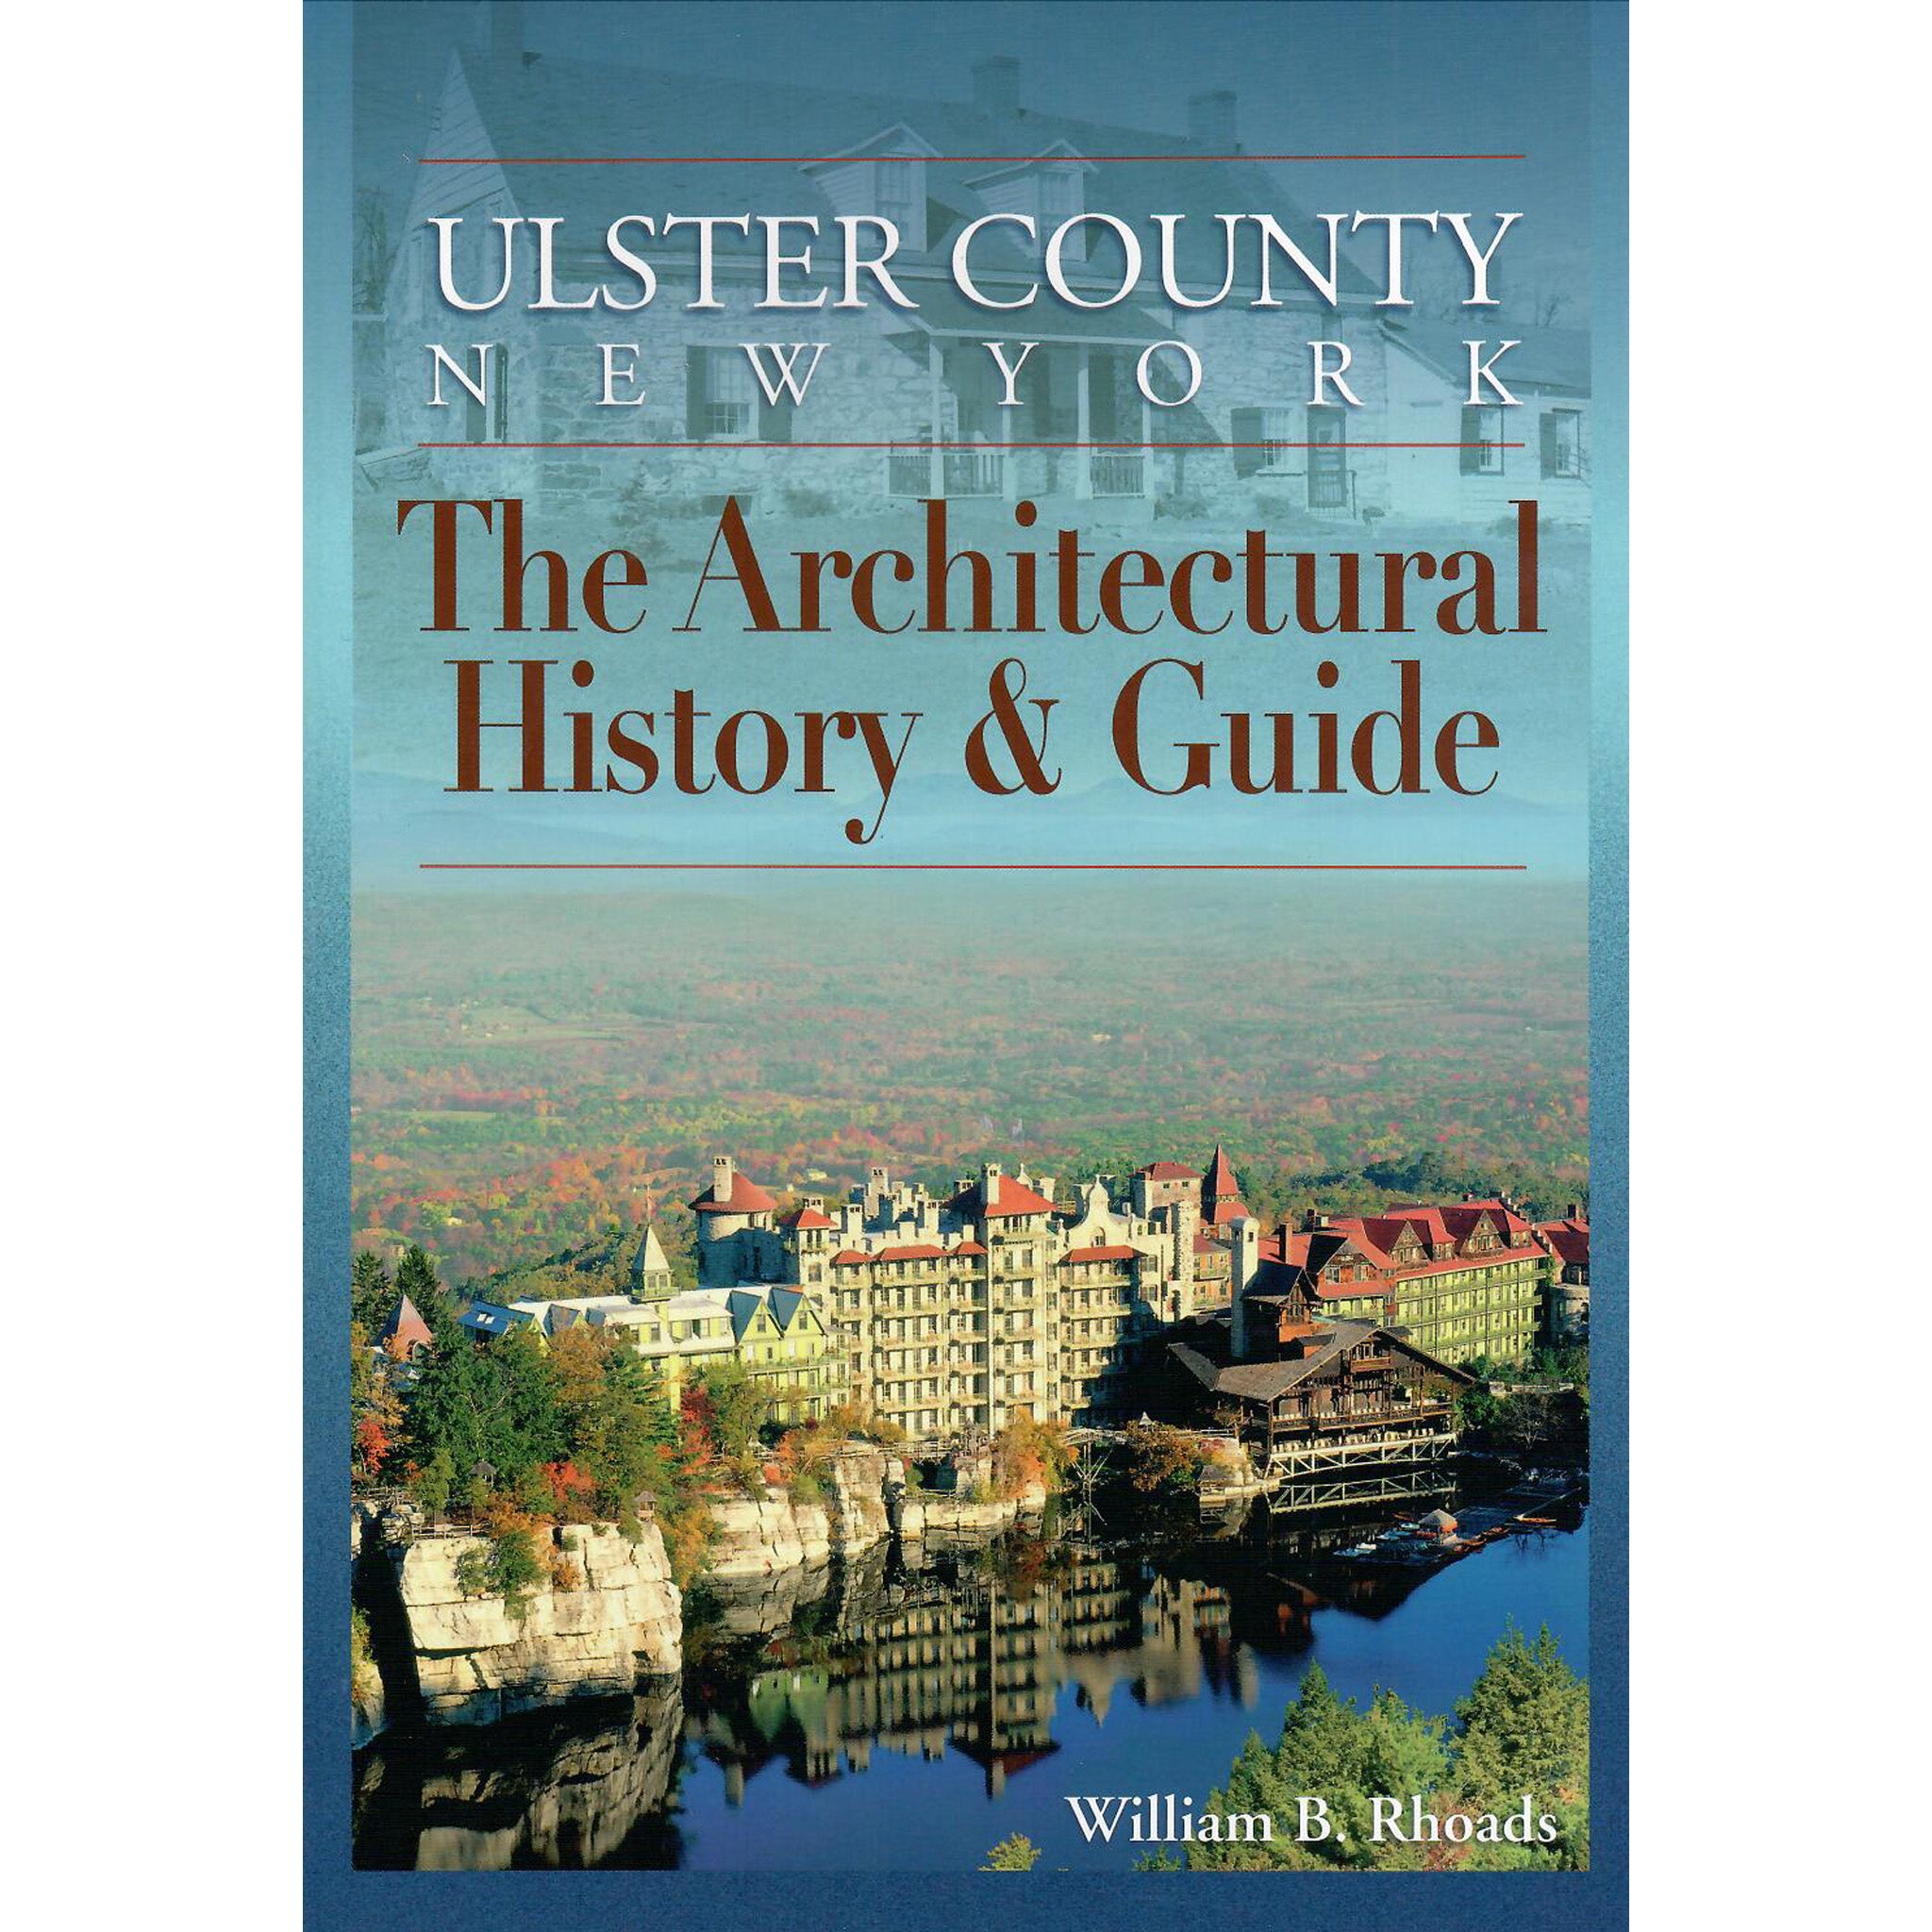 Ulster County New York: The Architectural History and Guide